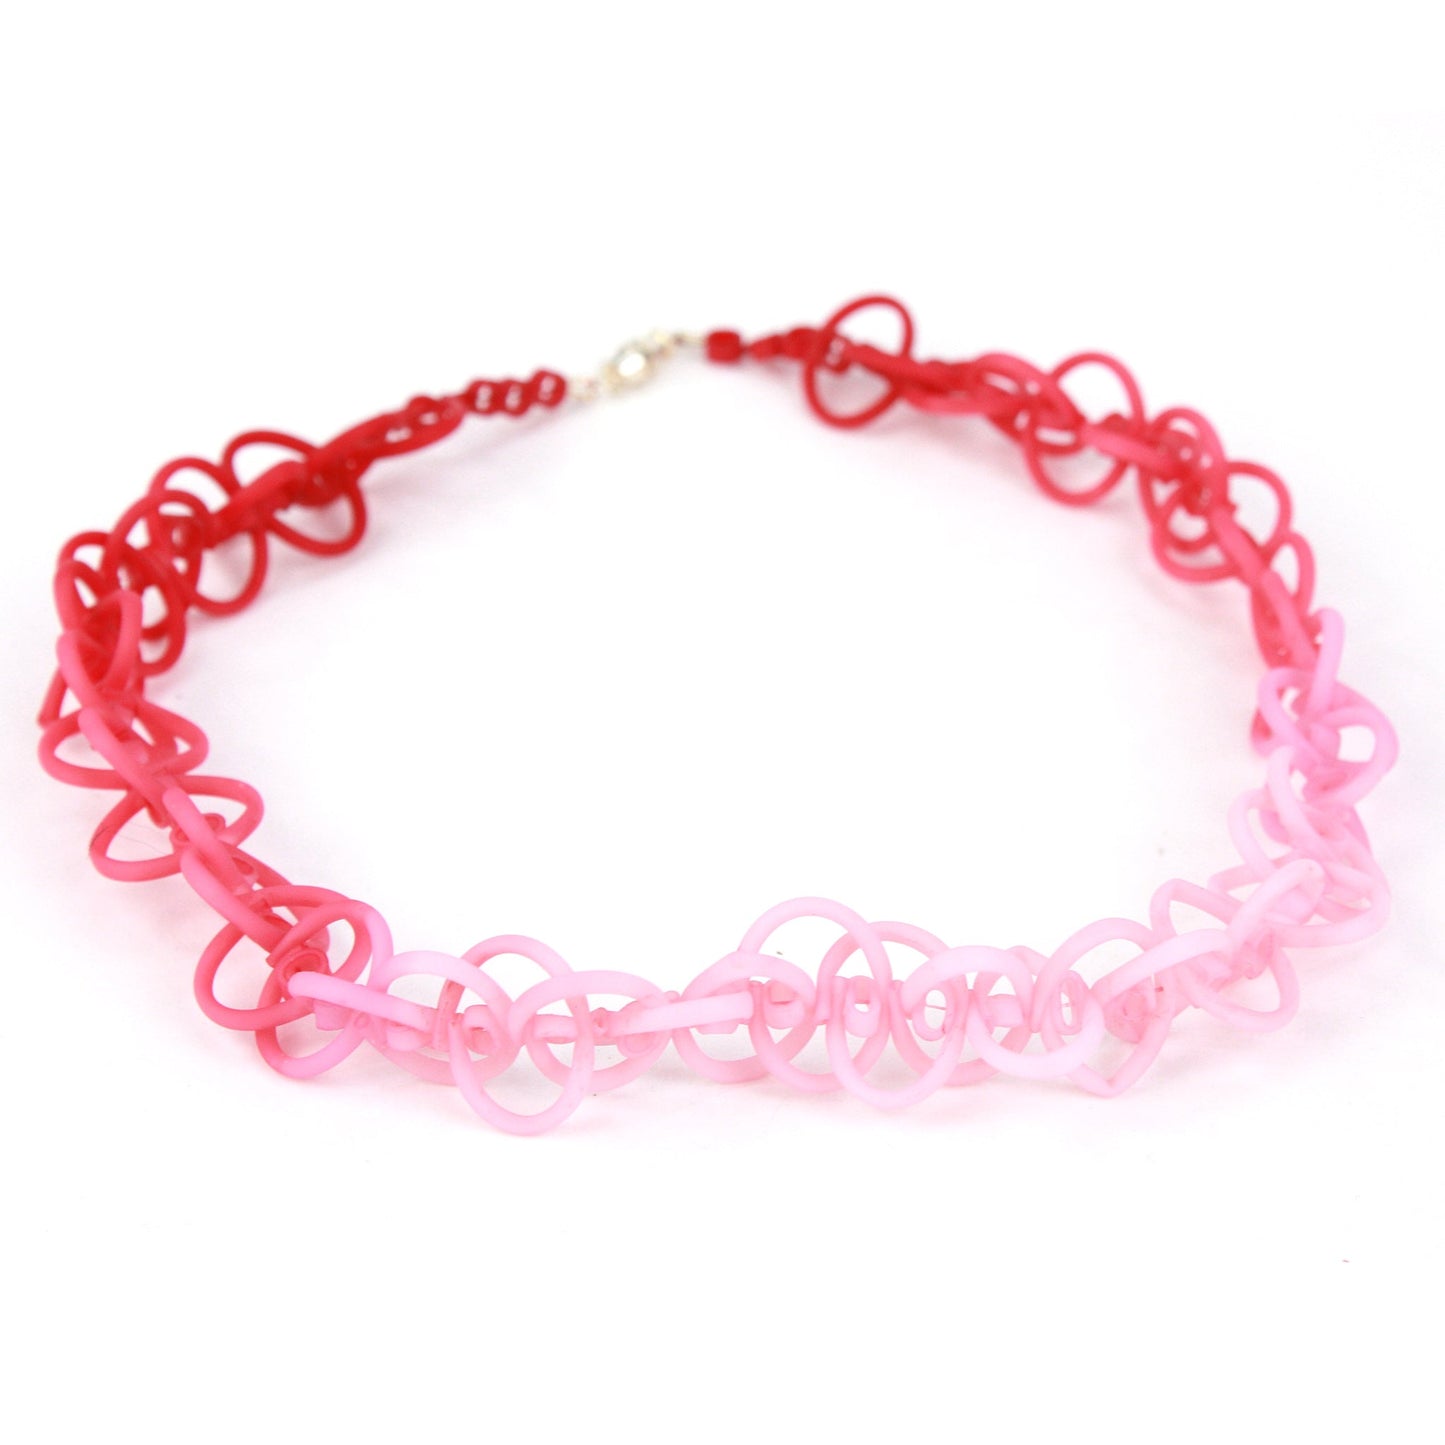 Short chain necklace - Red and pink